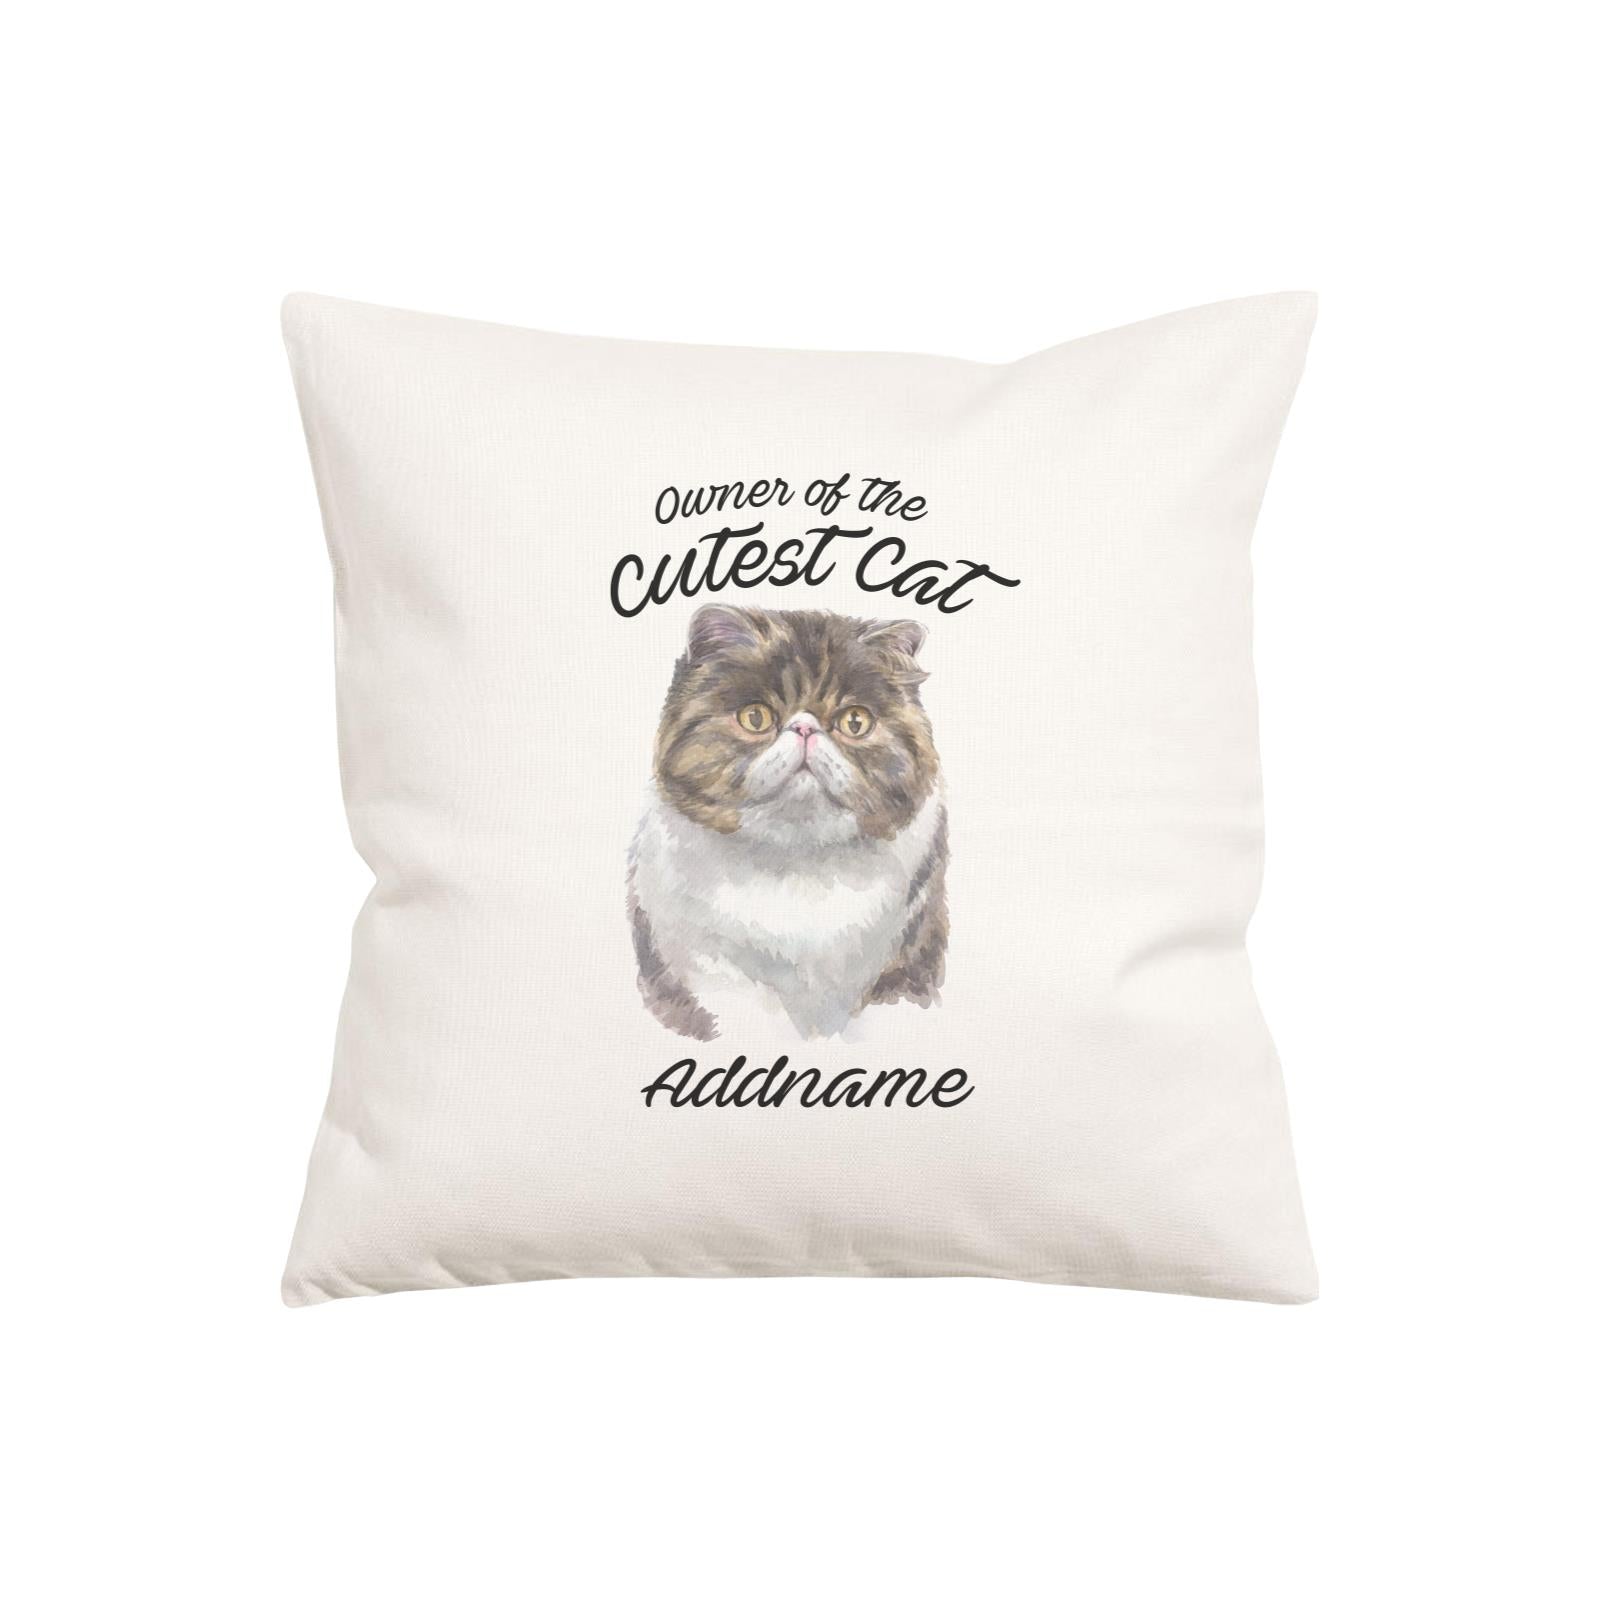 Watercolor Owner Of The Cutest Cat Exotic Shorthair Addname Pillow Cushion